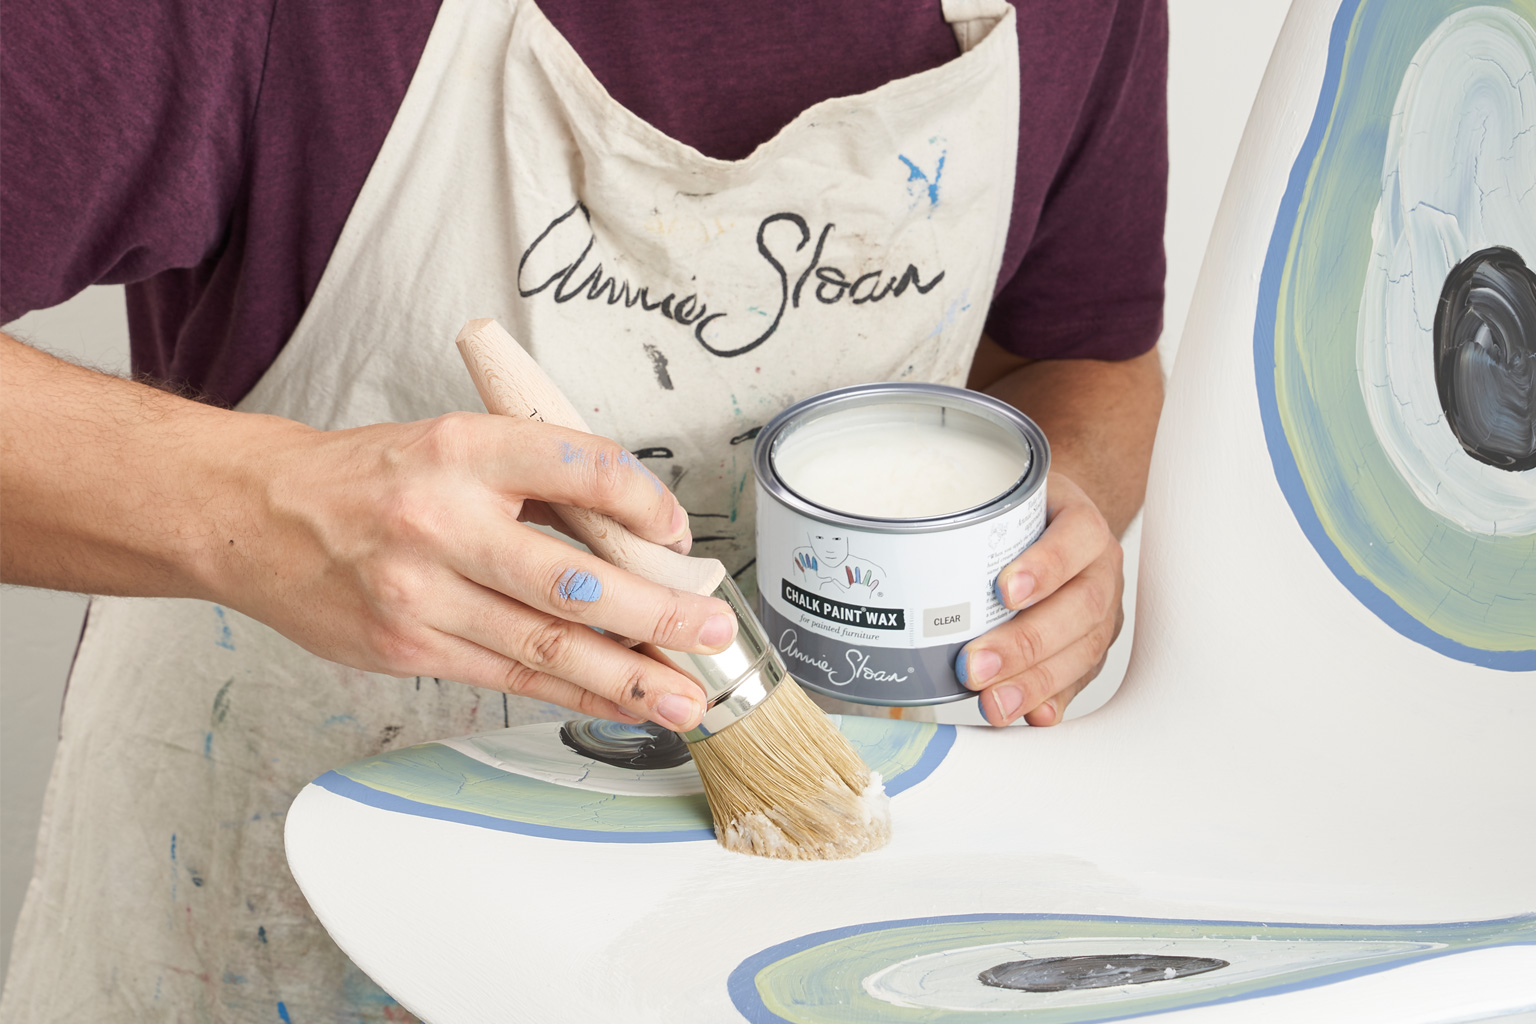 Felix Sloan demonstrating how to use wax on Chalk Paint®